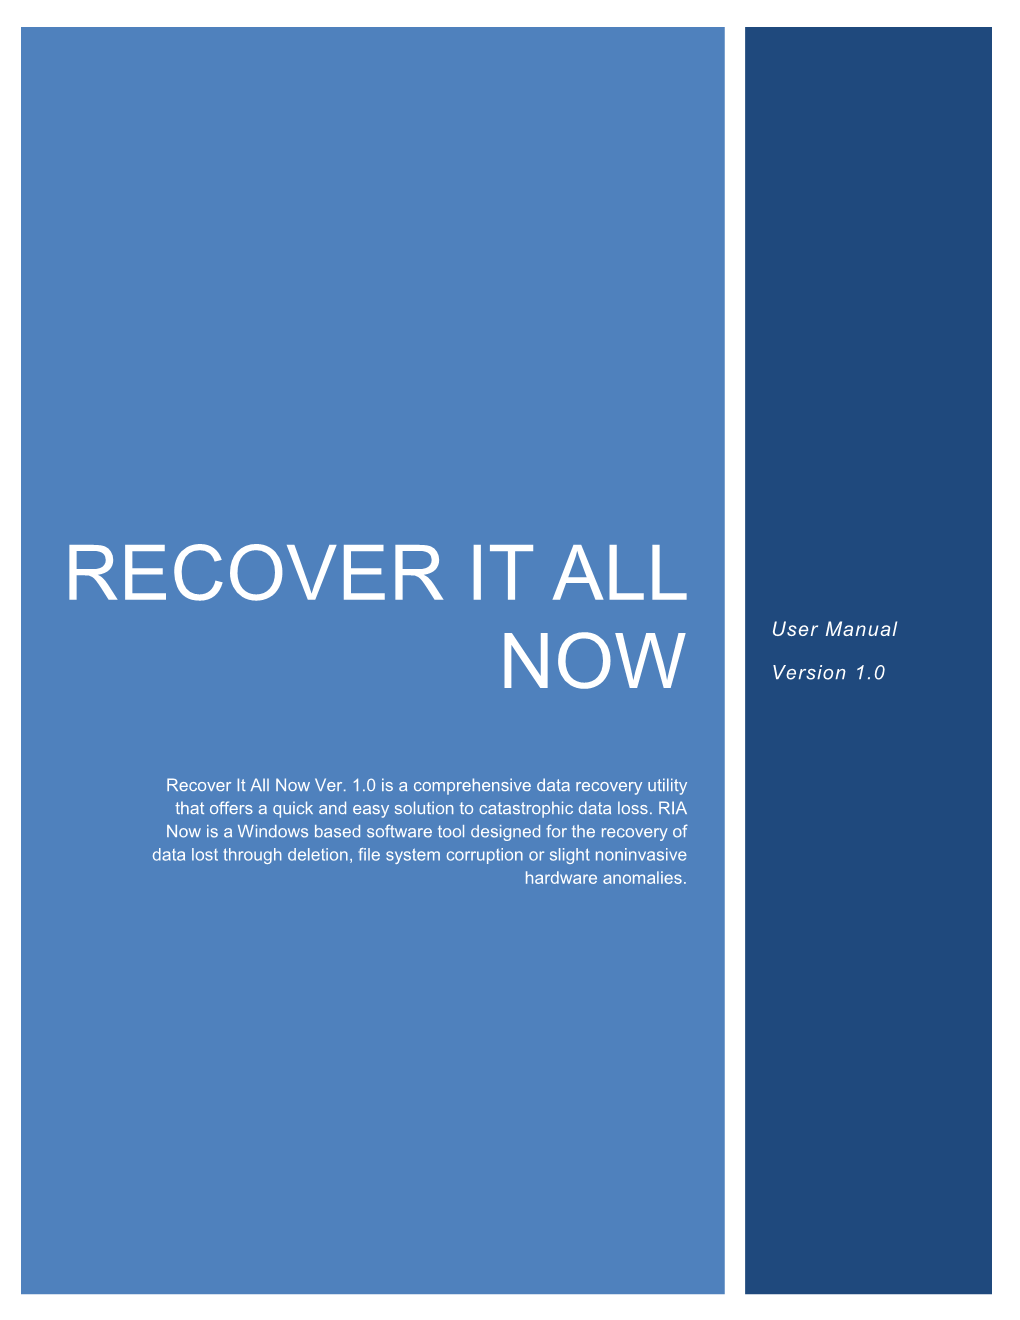 RECOVER IT ALL User Manual NOW Version 1.0